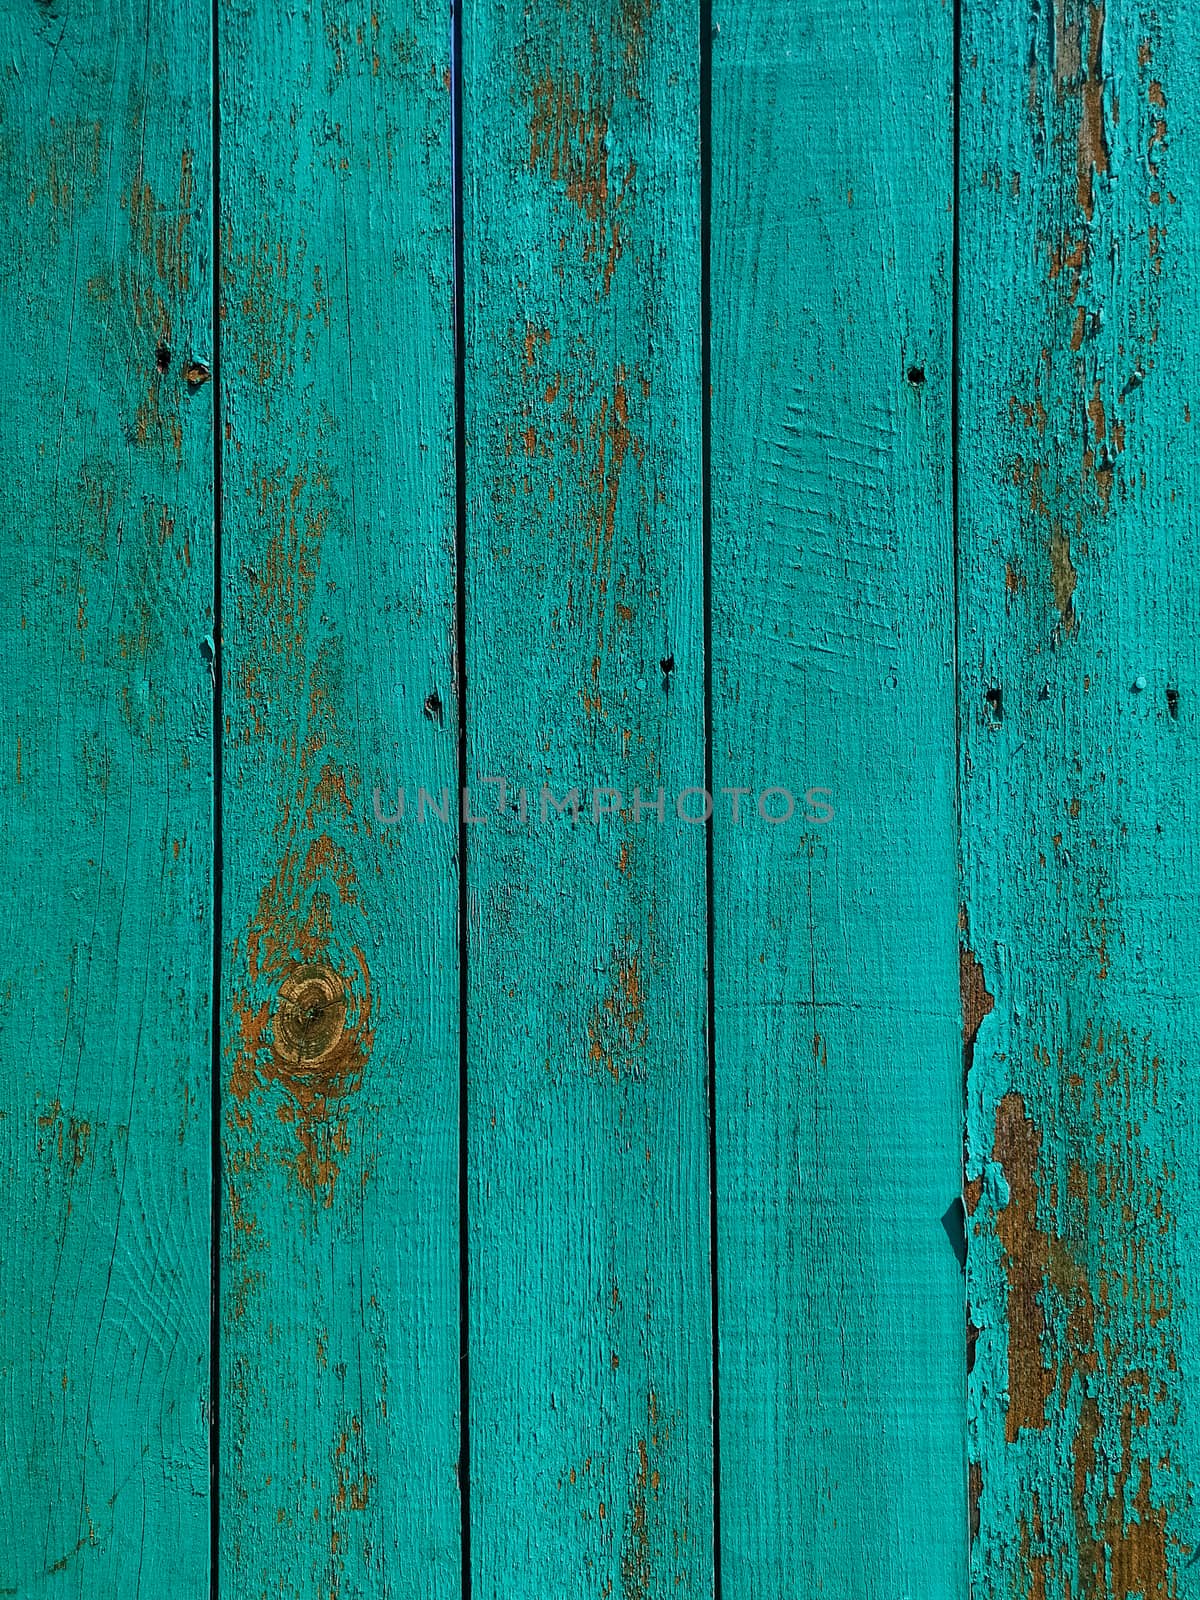 Green wood texture background. .Old ragged painted fence. by galinasharapova